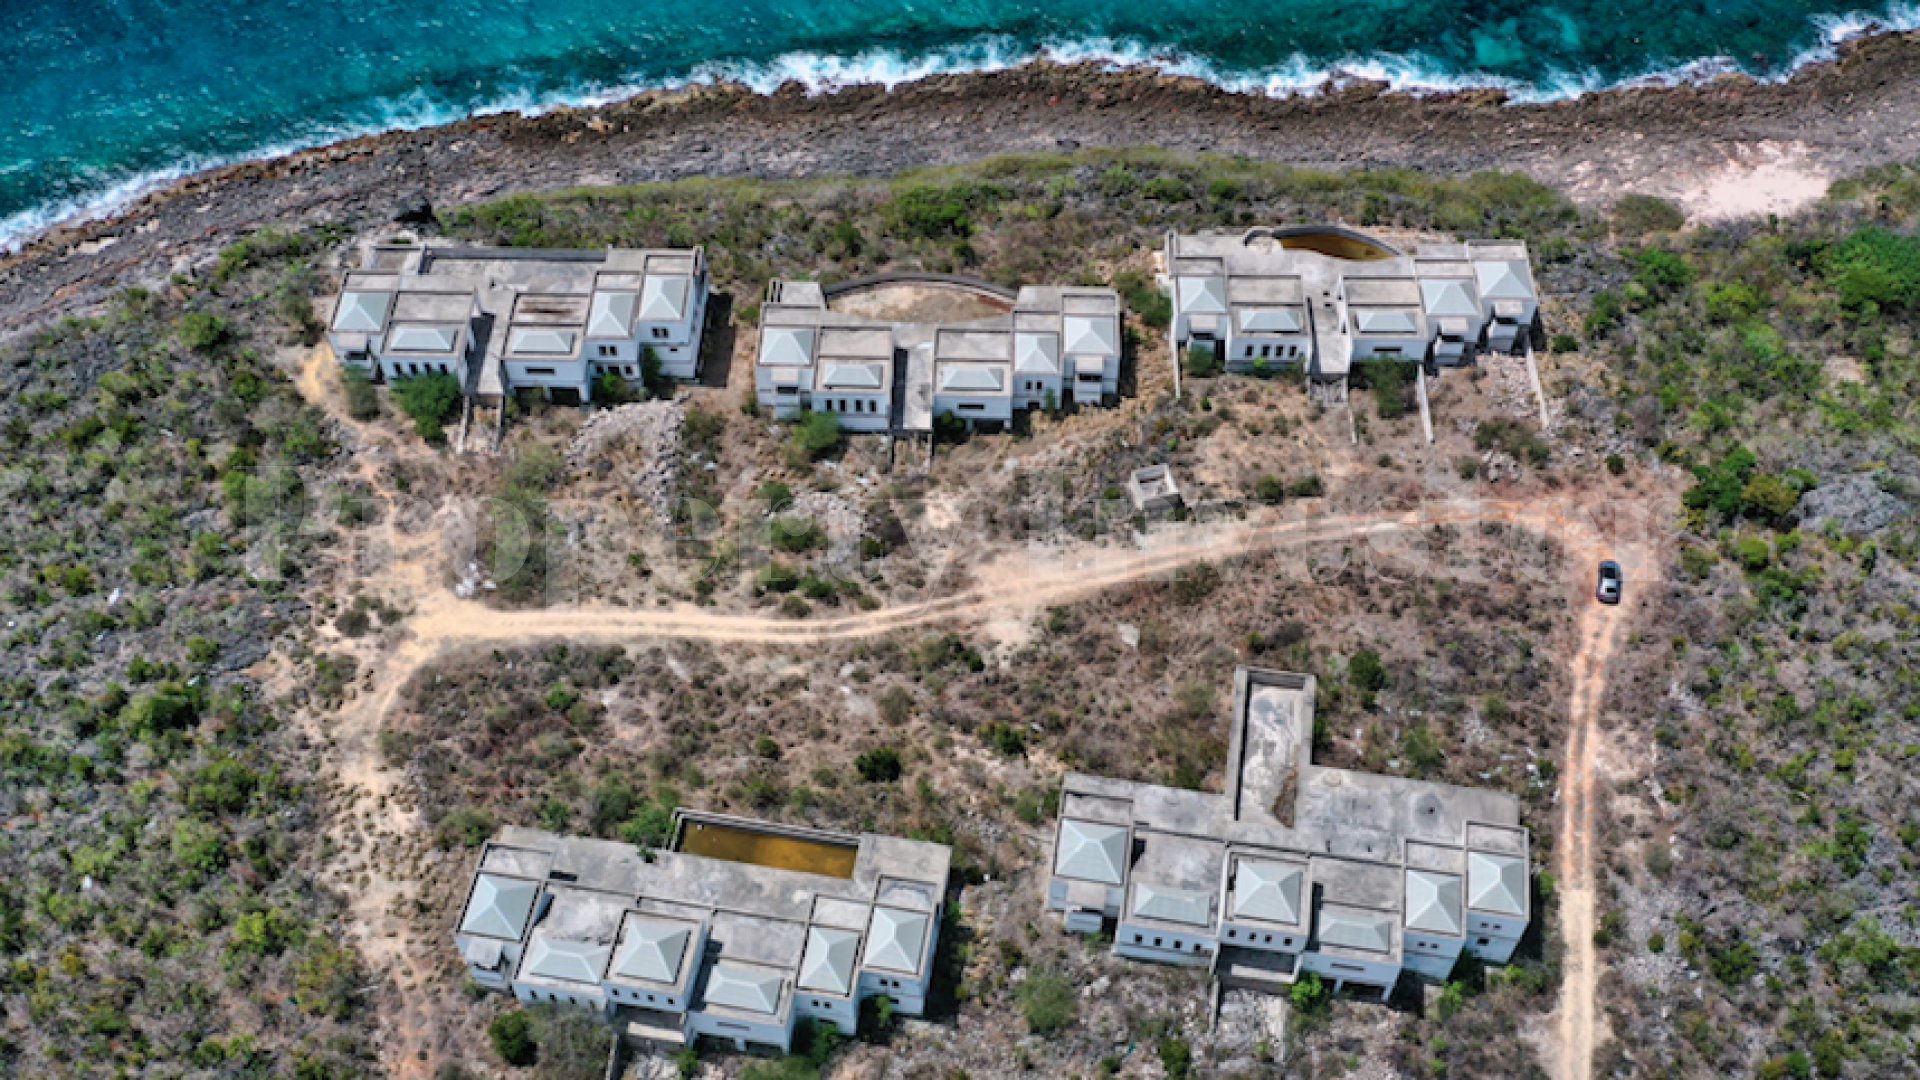 Well Located Development of 2.3 Hectares with 5 Unfinished Oceanfront Villas for Sale Near Shoal Bay, Anguilla